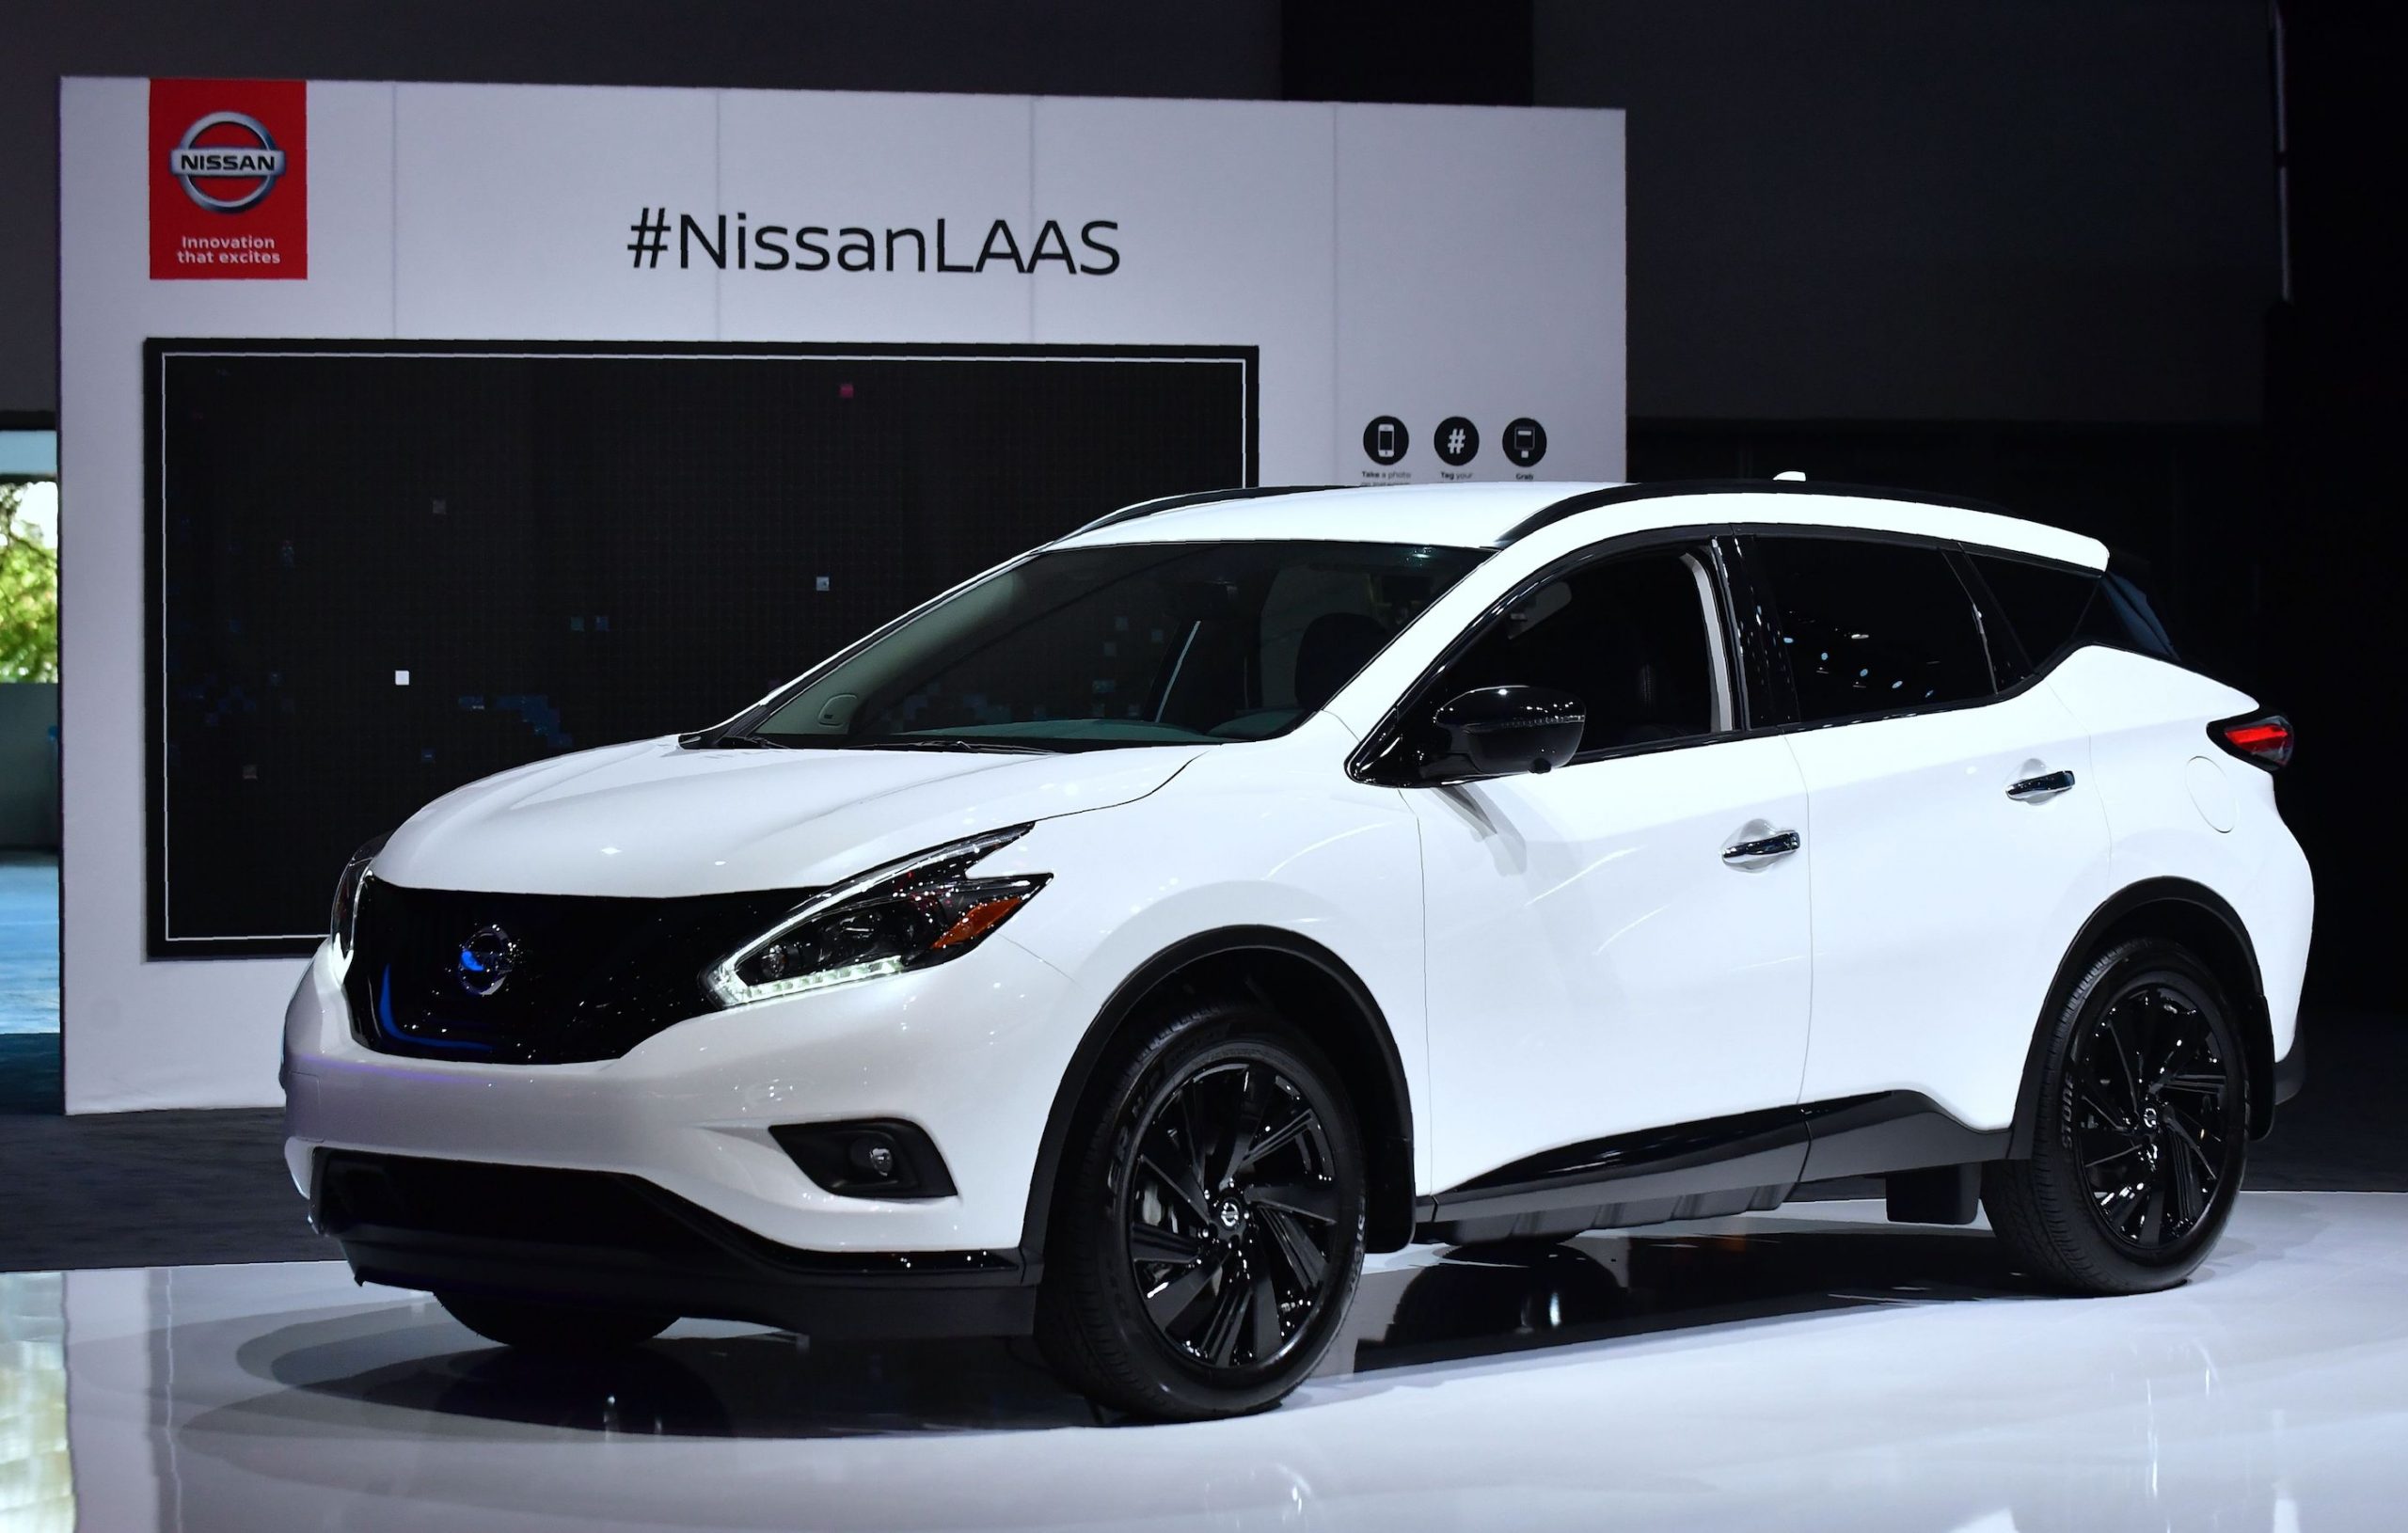 The 2018 Nissan Murano is displayed at the 2017 LA Auto Show